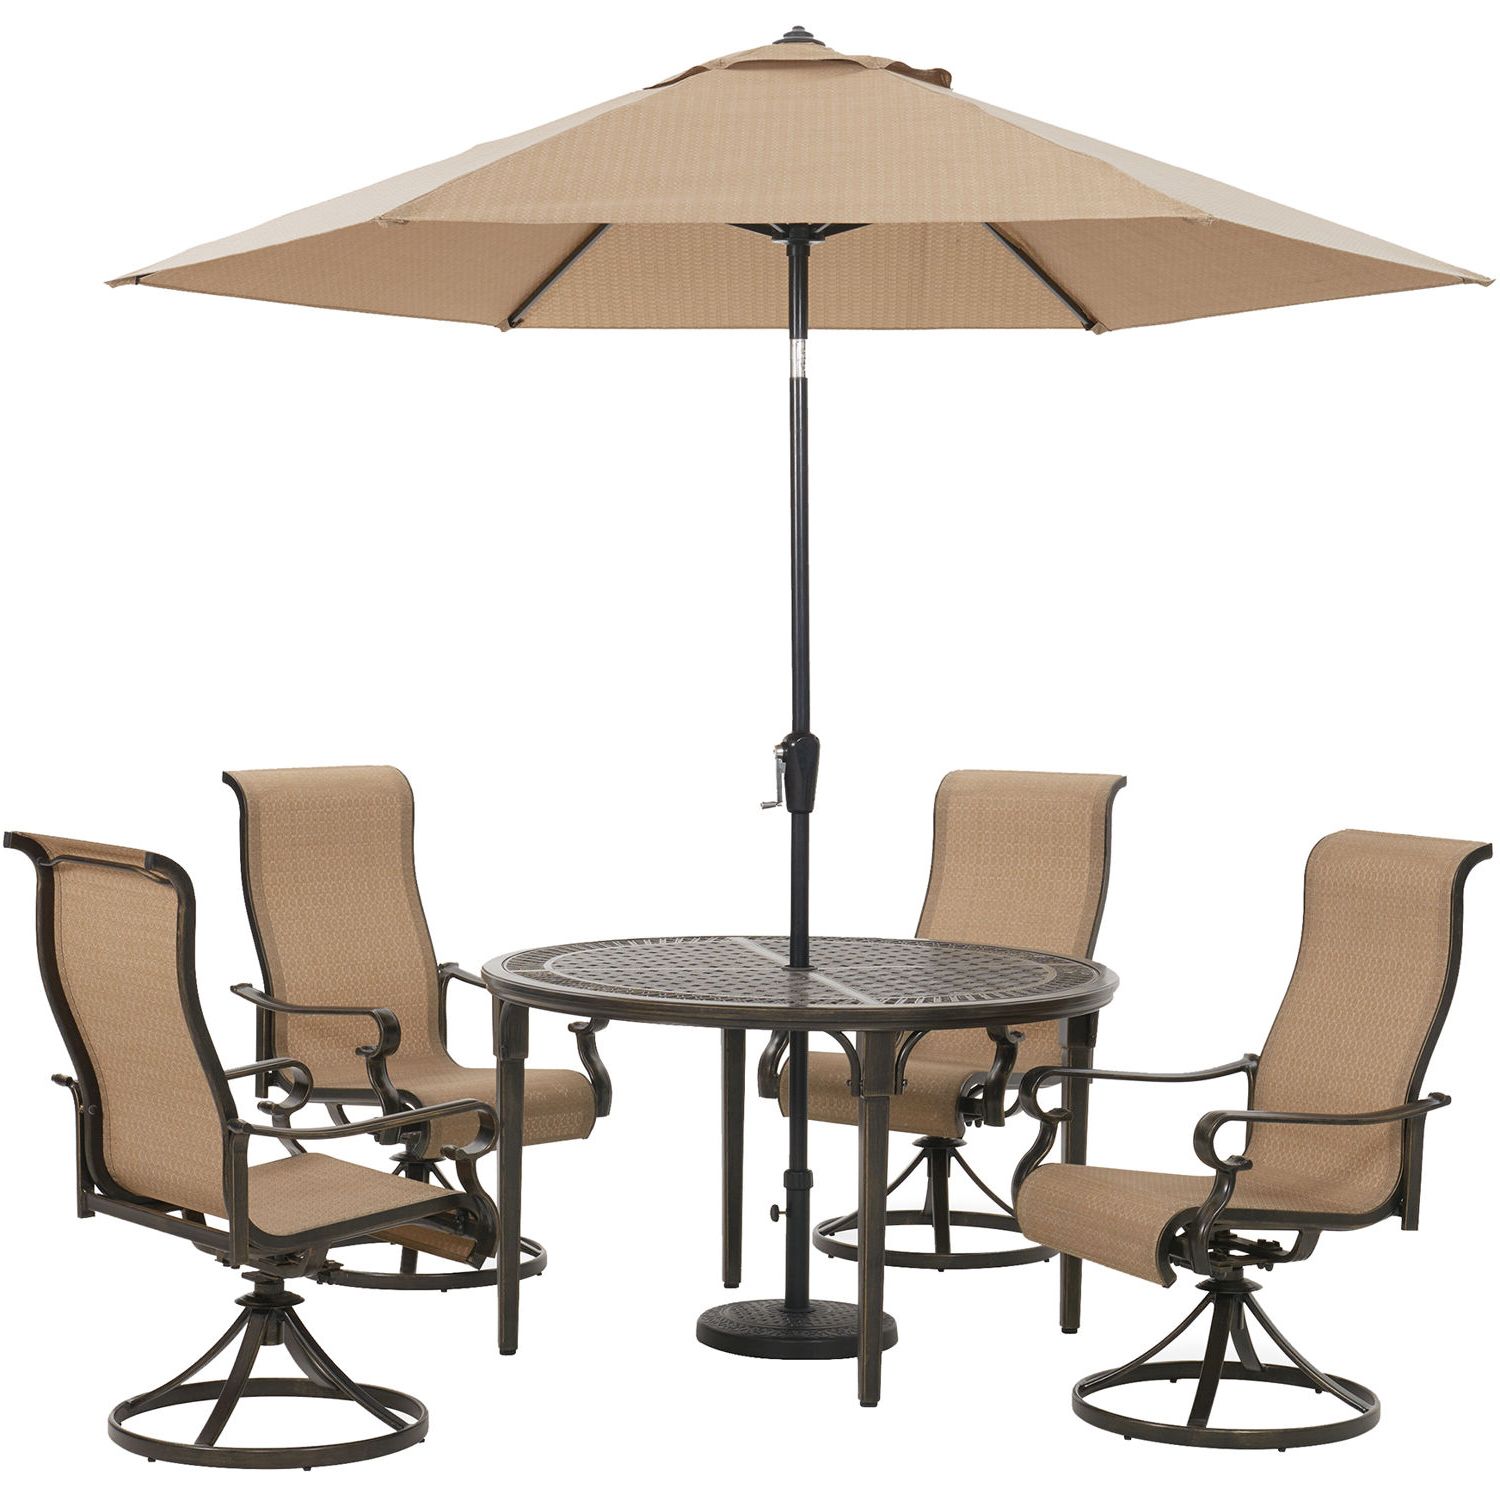 Most Popular Hanover Brigantine 5 Piece Outdoor Dining Set With 4 Sling Swivel Intended For 5 Piece Round Patio Dining Sets (View 10 of 15)